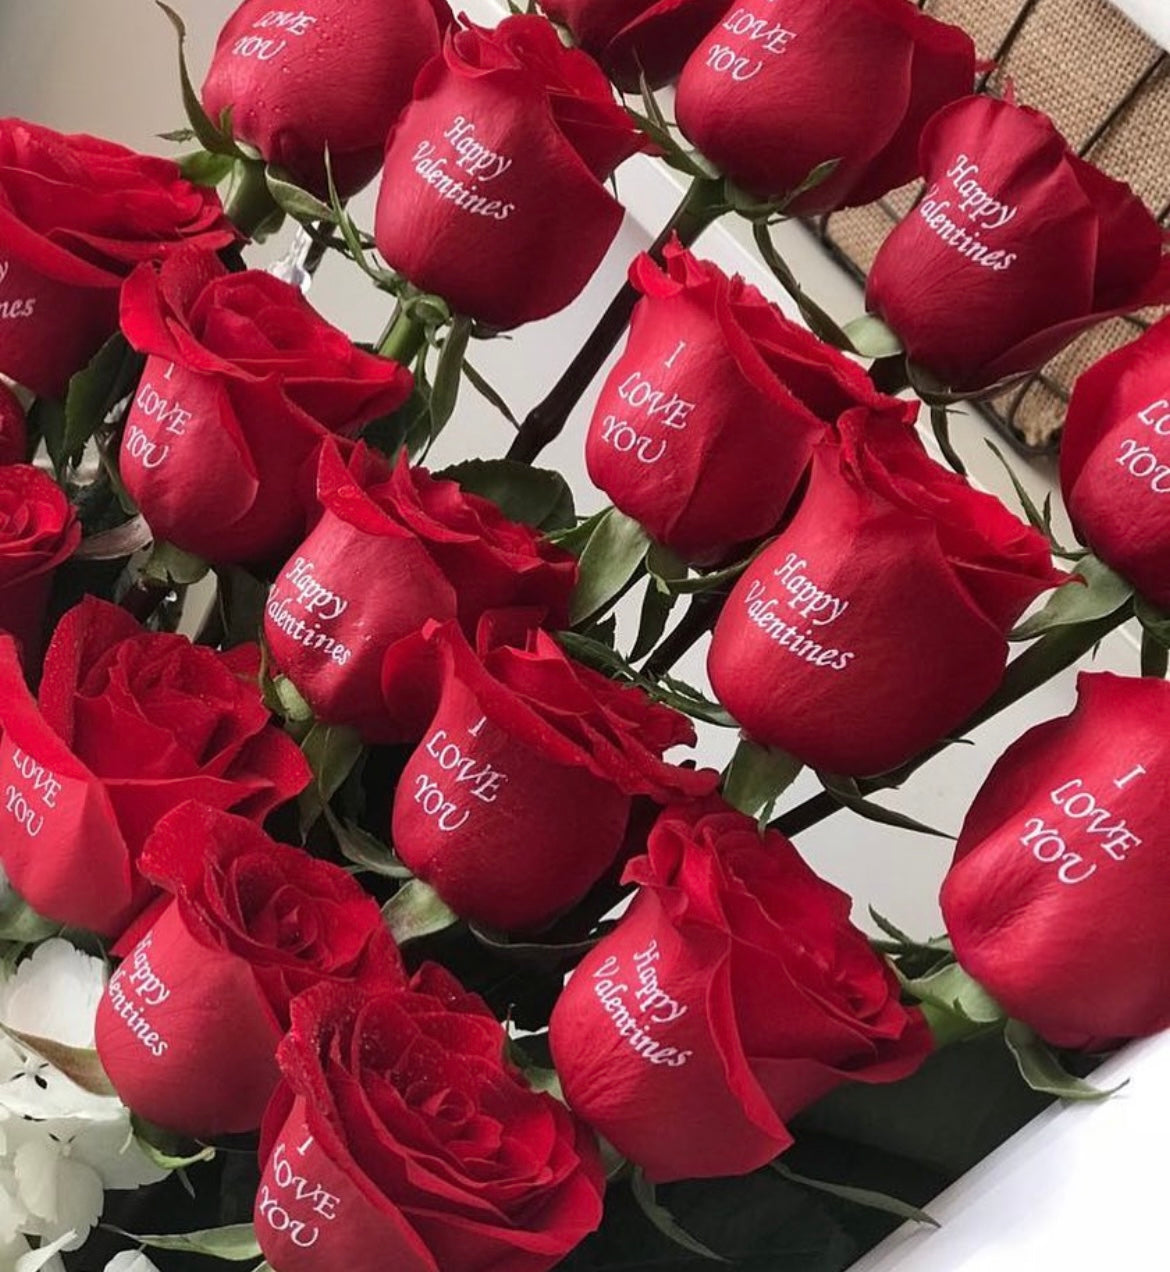 Lovely roses with heartfelt messages such as 'I love you' printed on their petals, a unique and romantic Valentine's Day surprise.